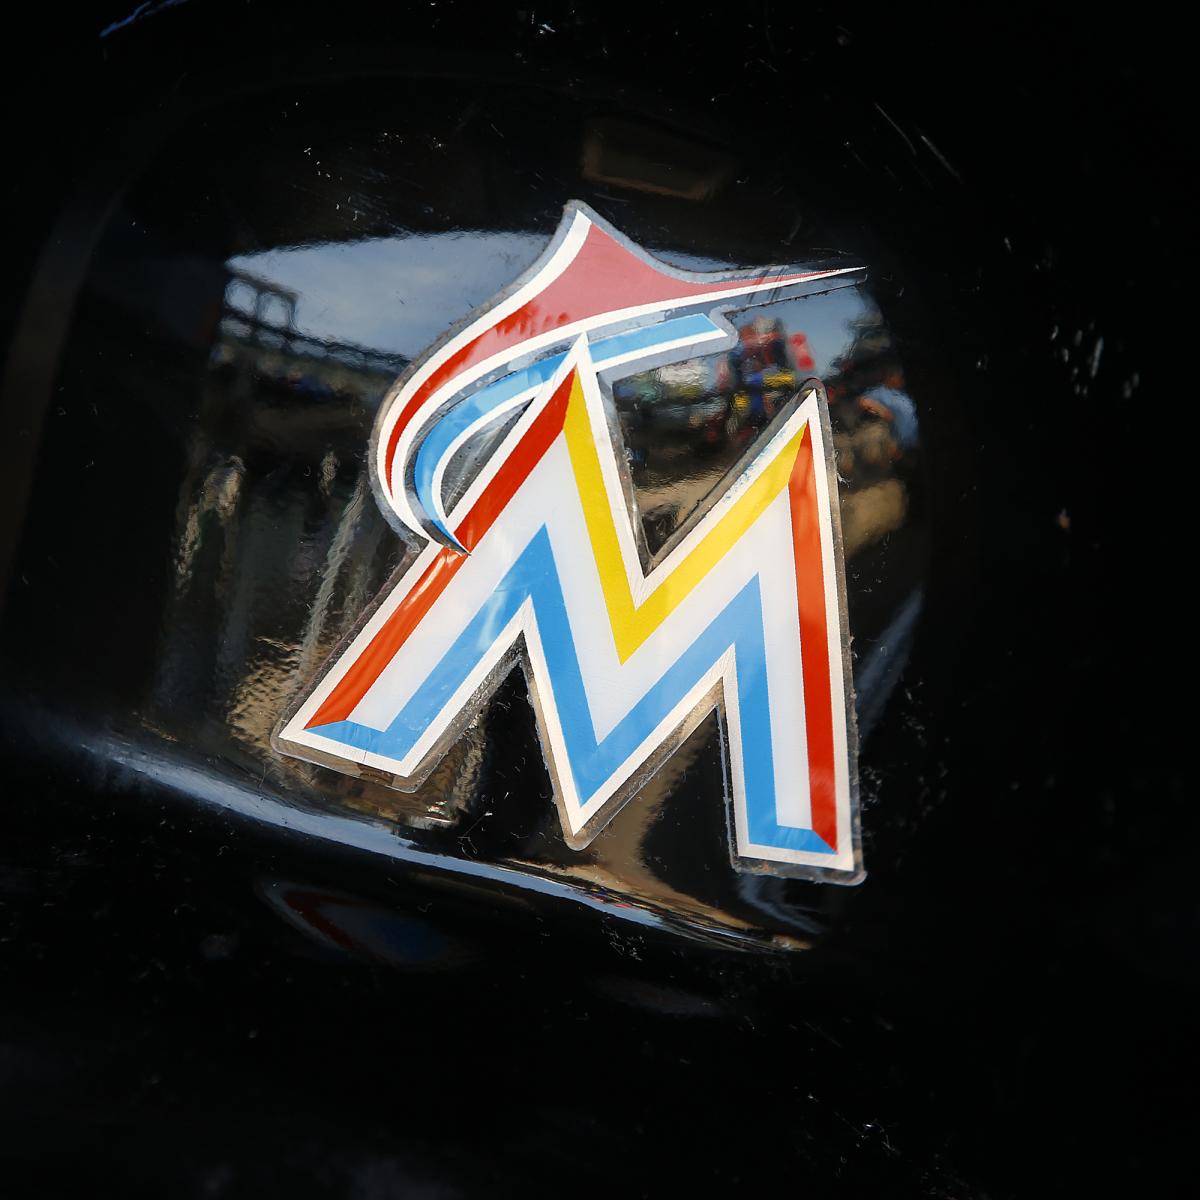 New colours and logo for Jeter's Marlins 